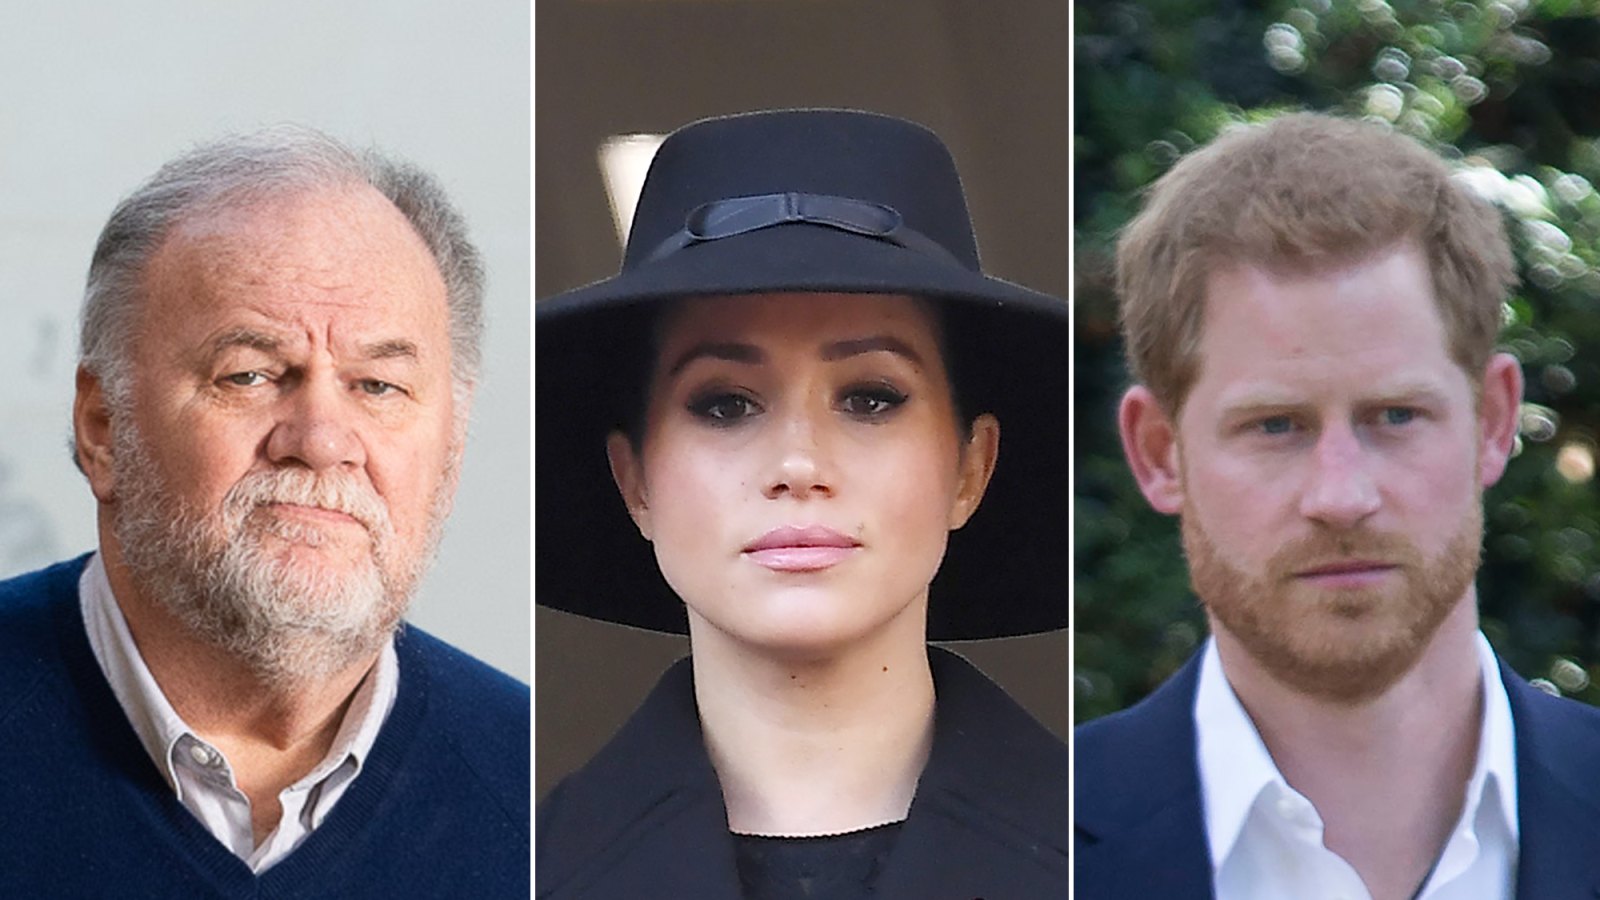 Duchess Meghan’s Father Thomas Markle Says She and Prince Harry Are ‘Destroying’ the Royal Family